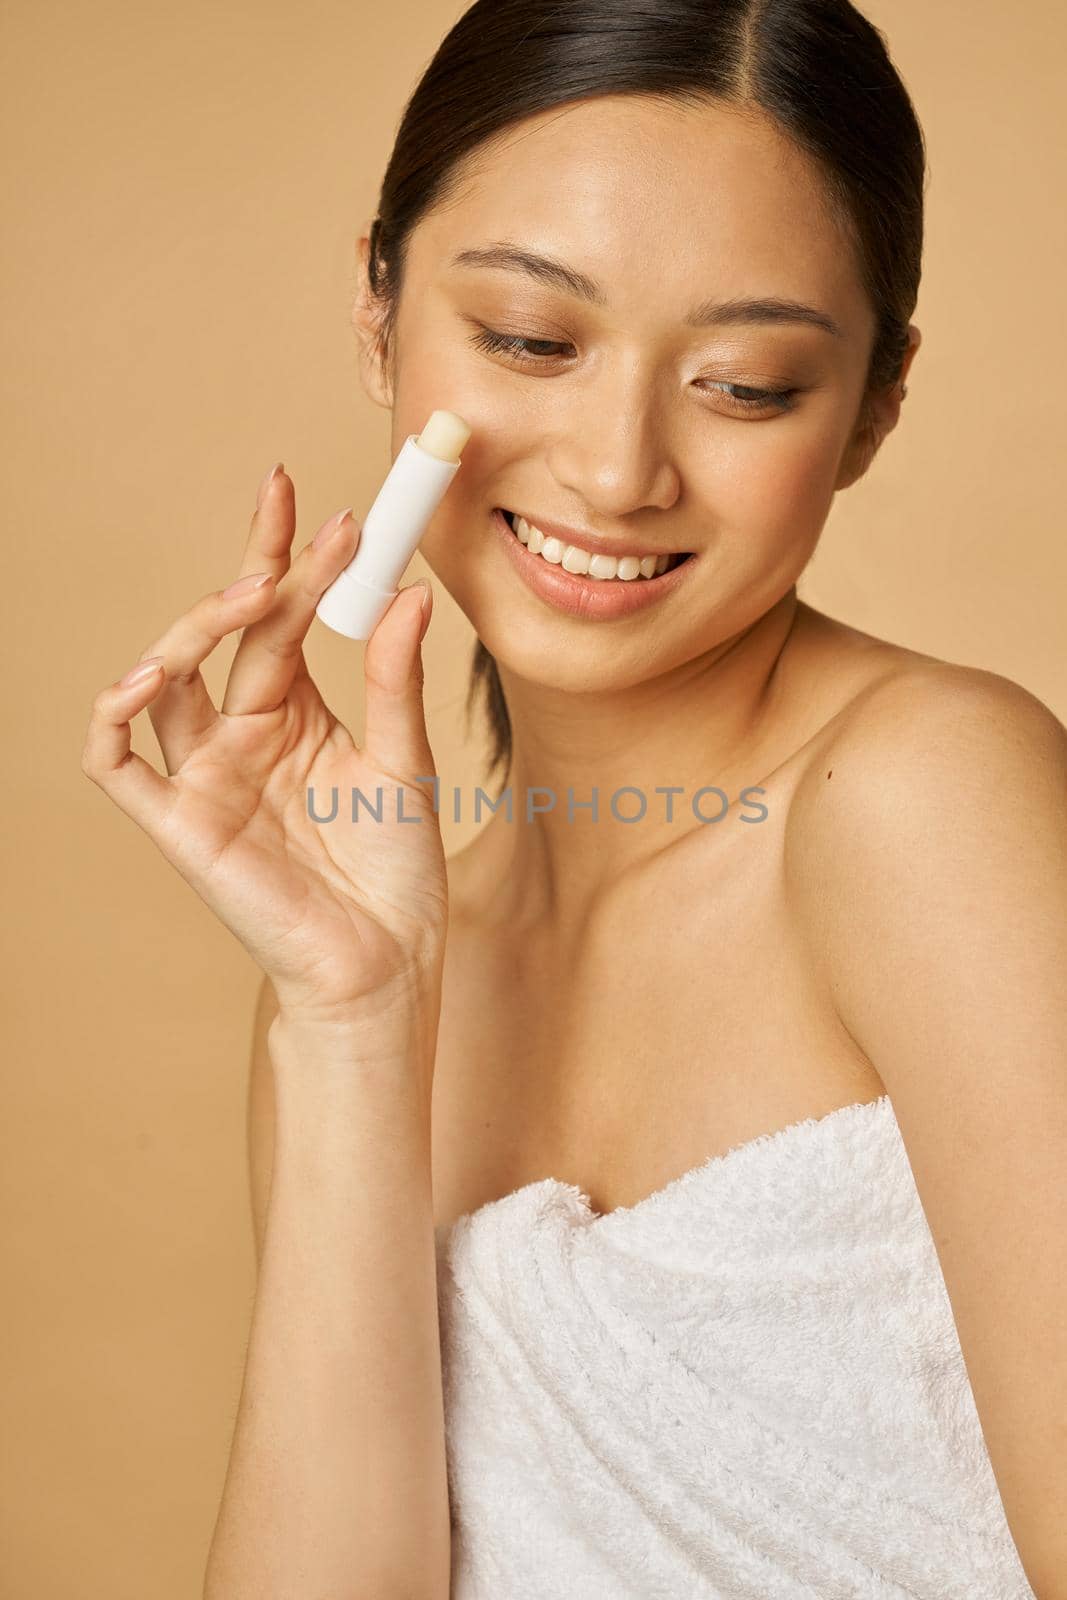 Attractive young woman wrapped in towel smiling and holding lip balm while posing isolated over beige background by friendsstock